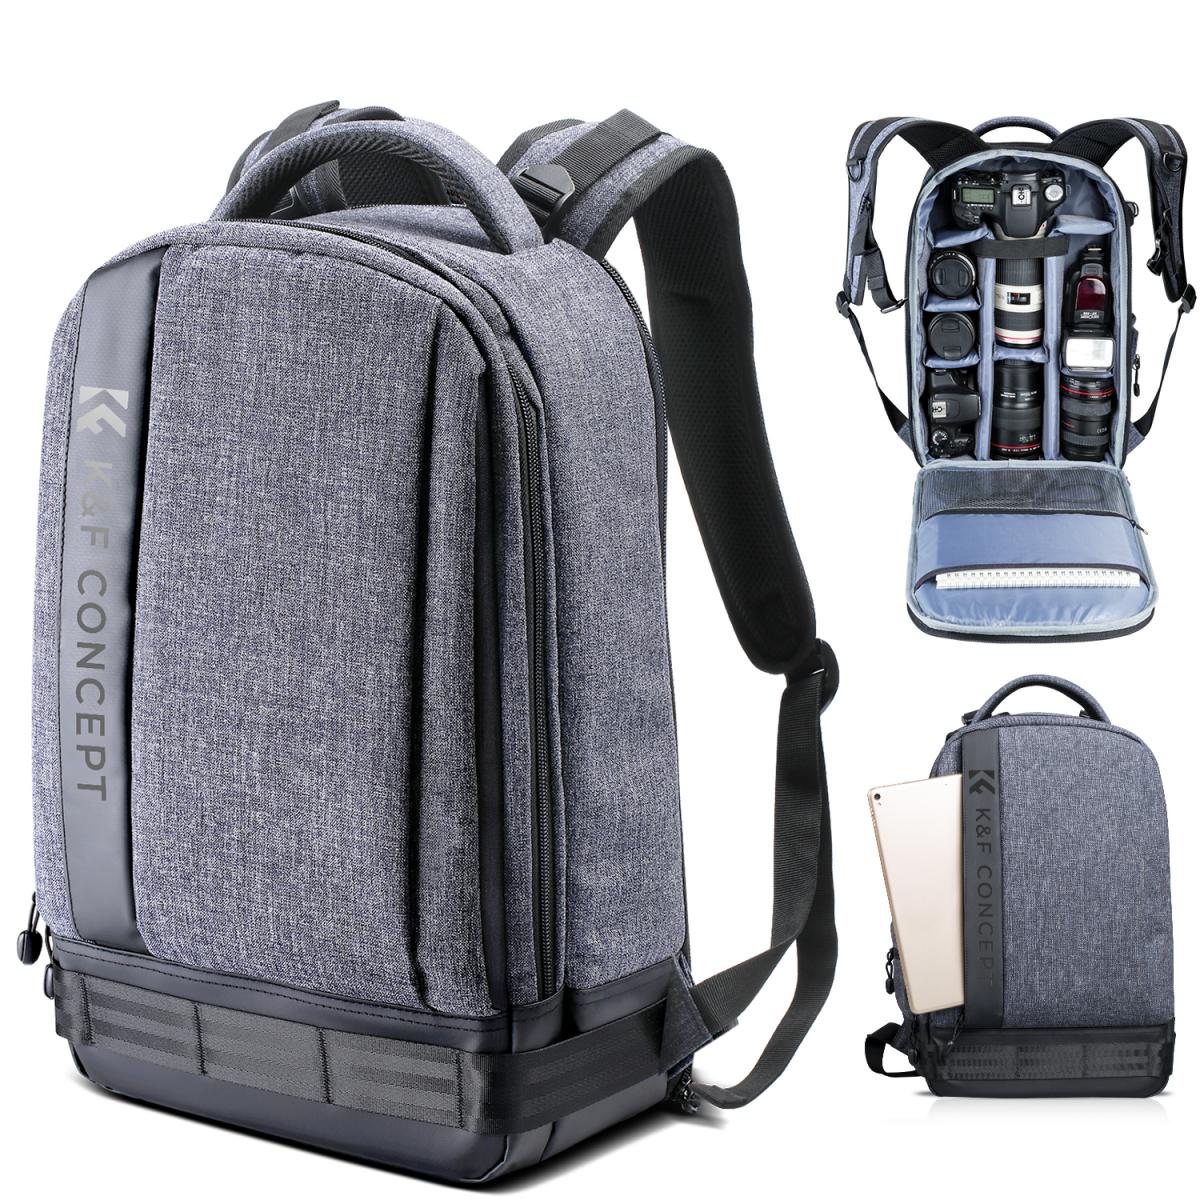 Professional DSLR Camera Backpack Grey Large 17.3*6.3*11.4 inches ...